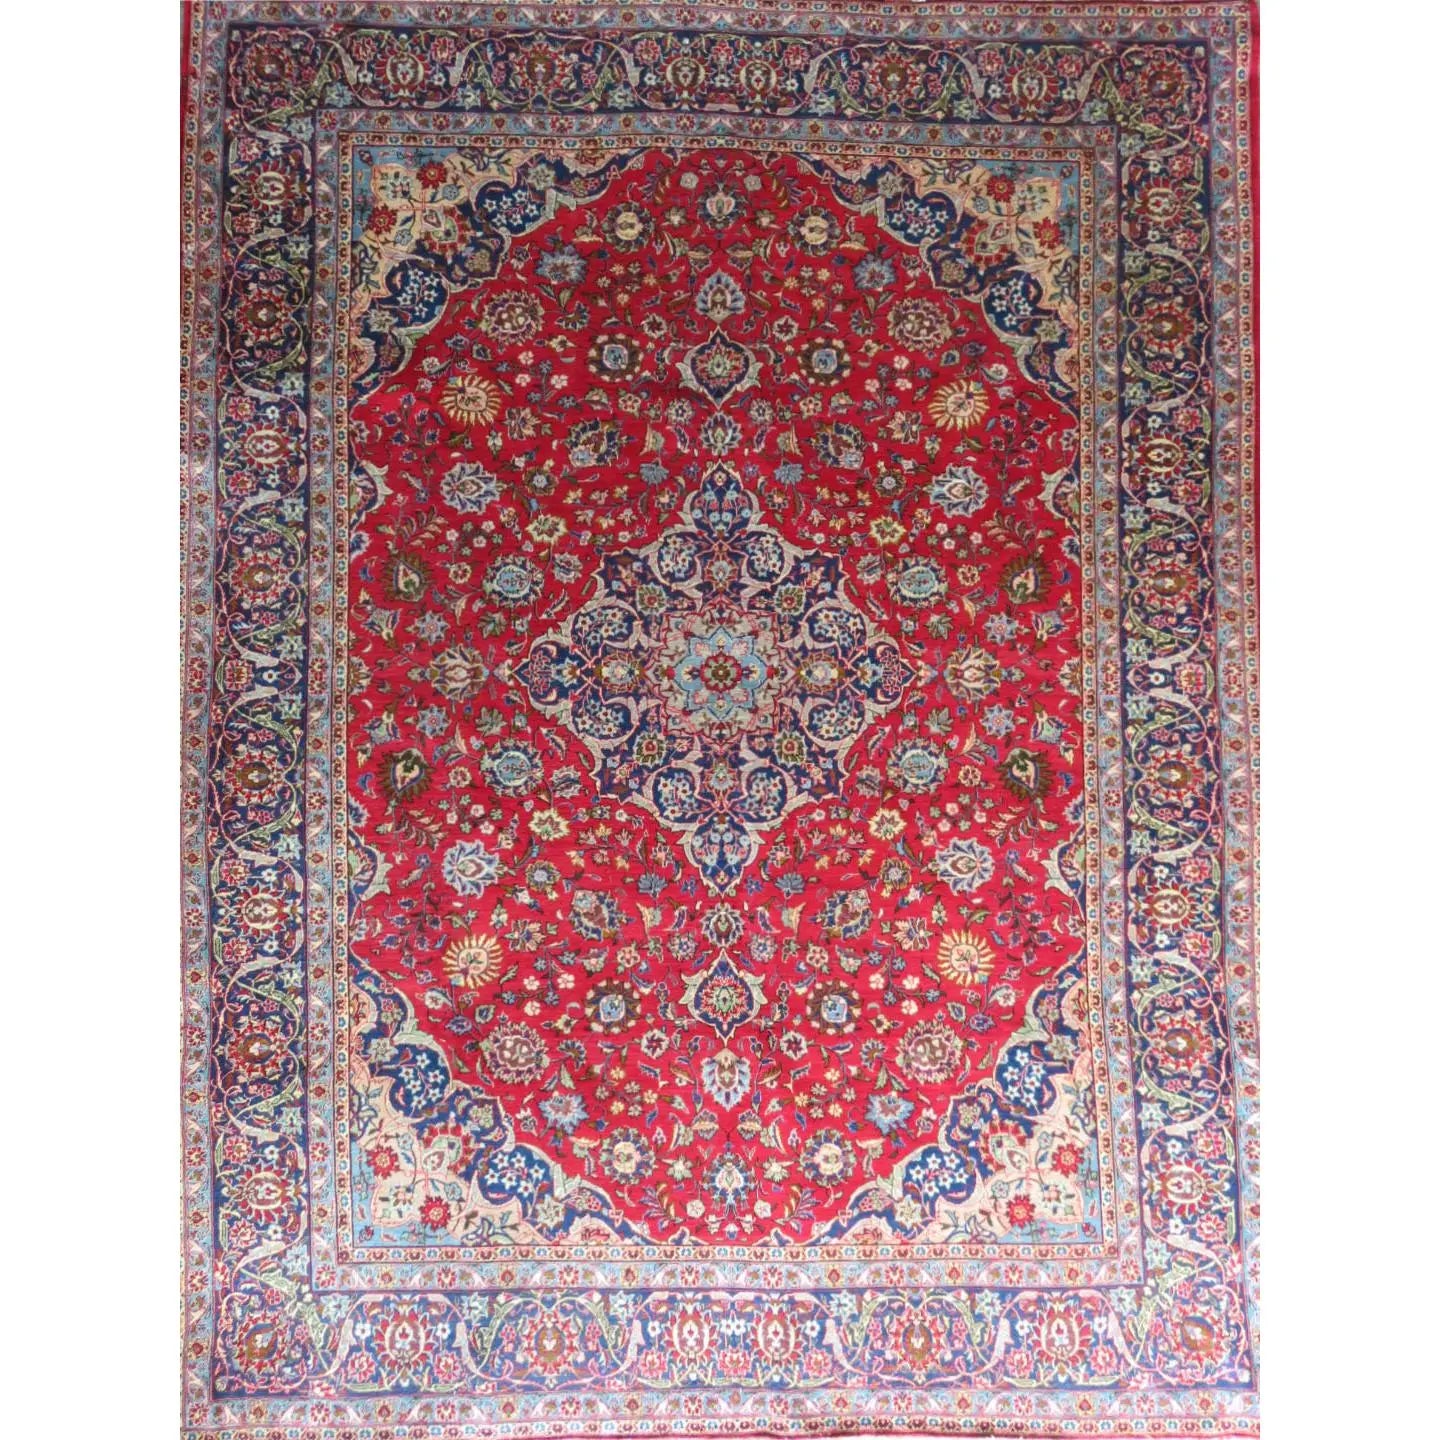 Hand-Knotted Vintage Rug 13'4" x 10'3"